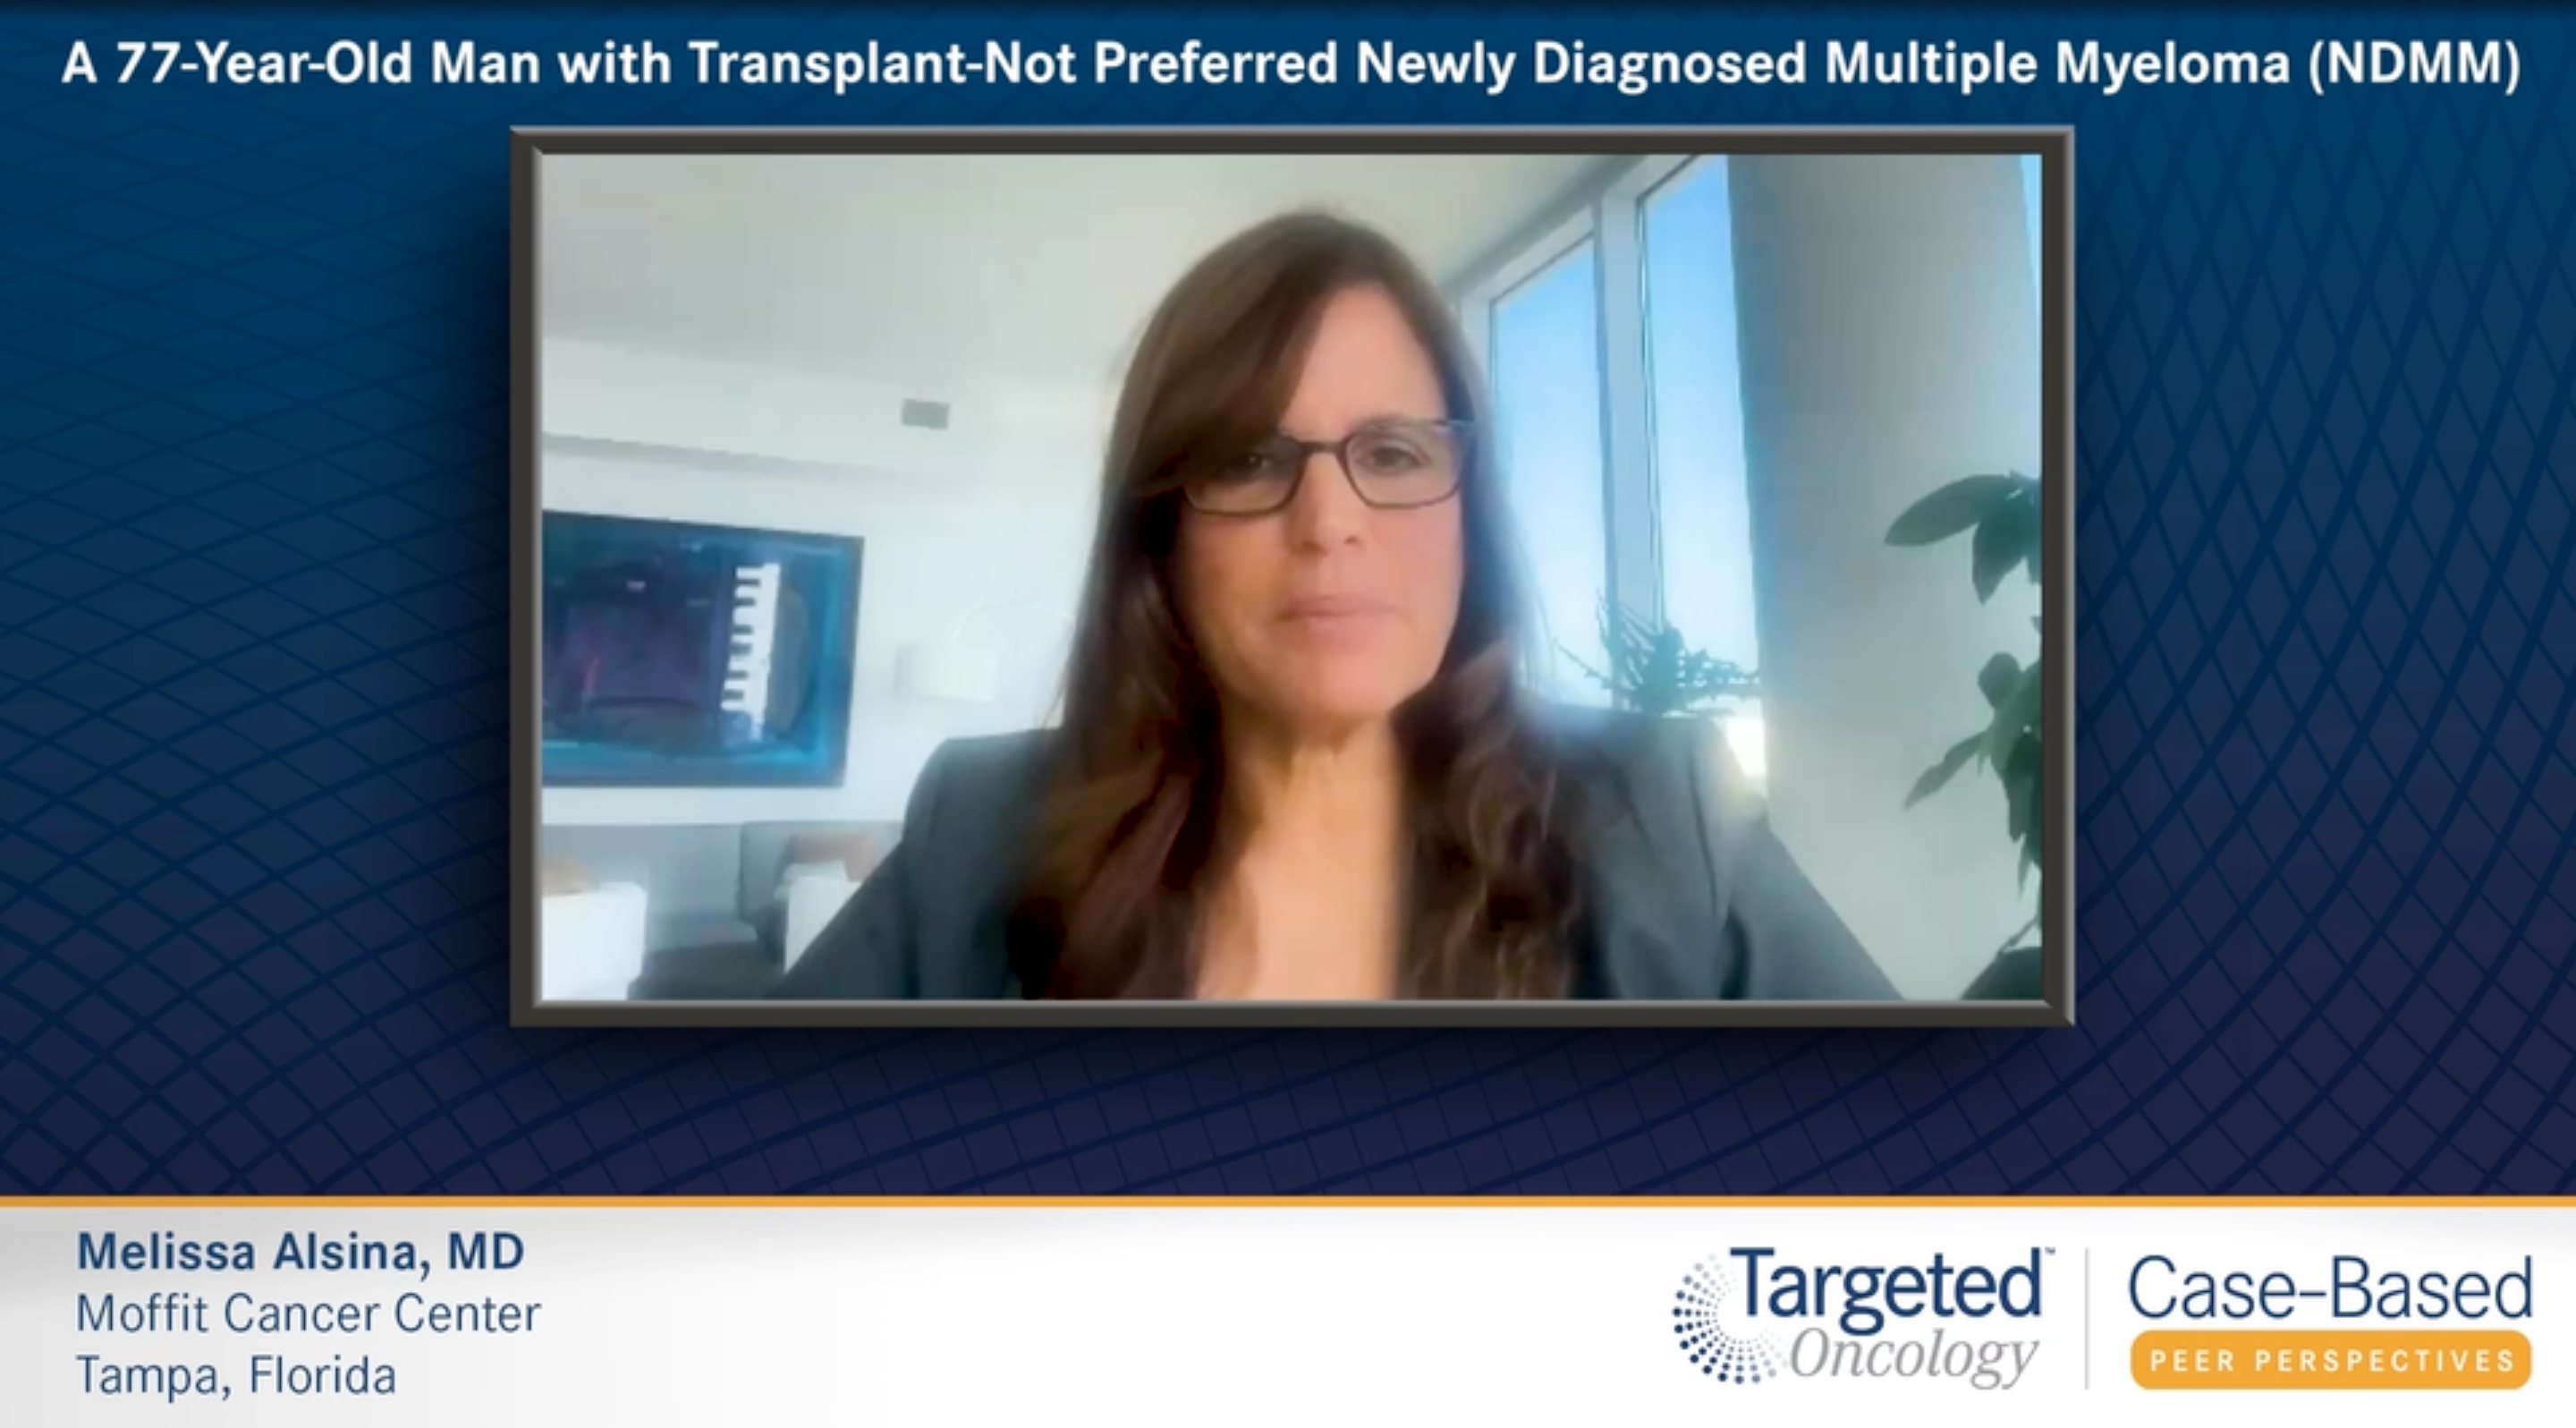 A 77-Year-Old Man with Transplant-Not Preferred Newly Diagnosed Multiple Myeloma (NDMM)